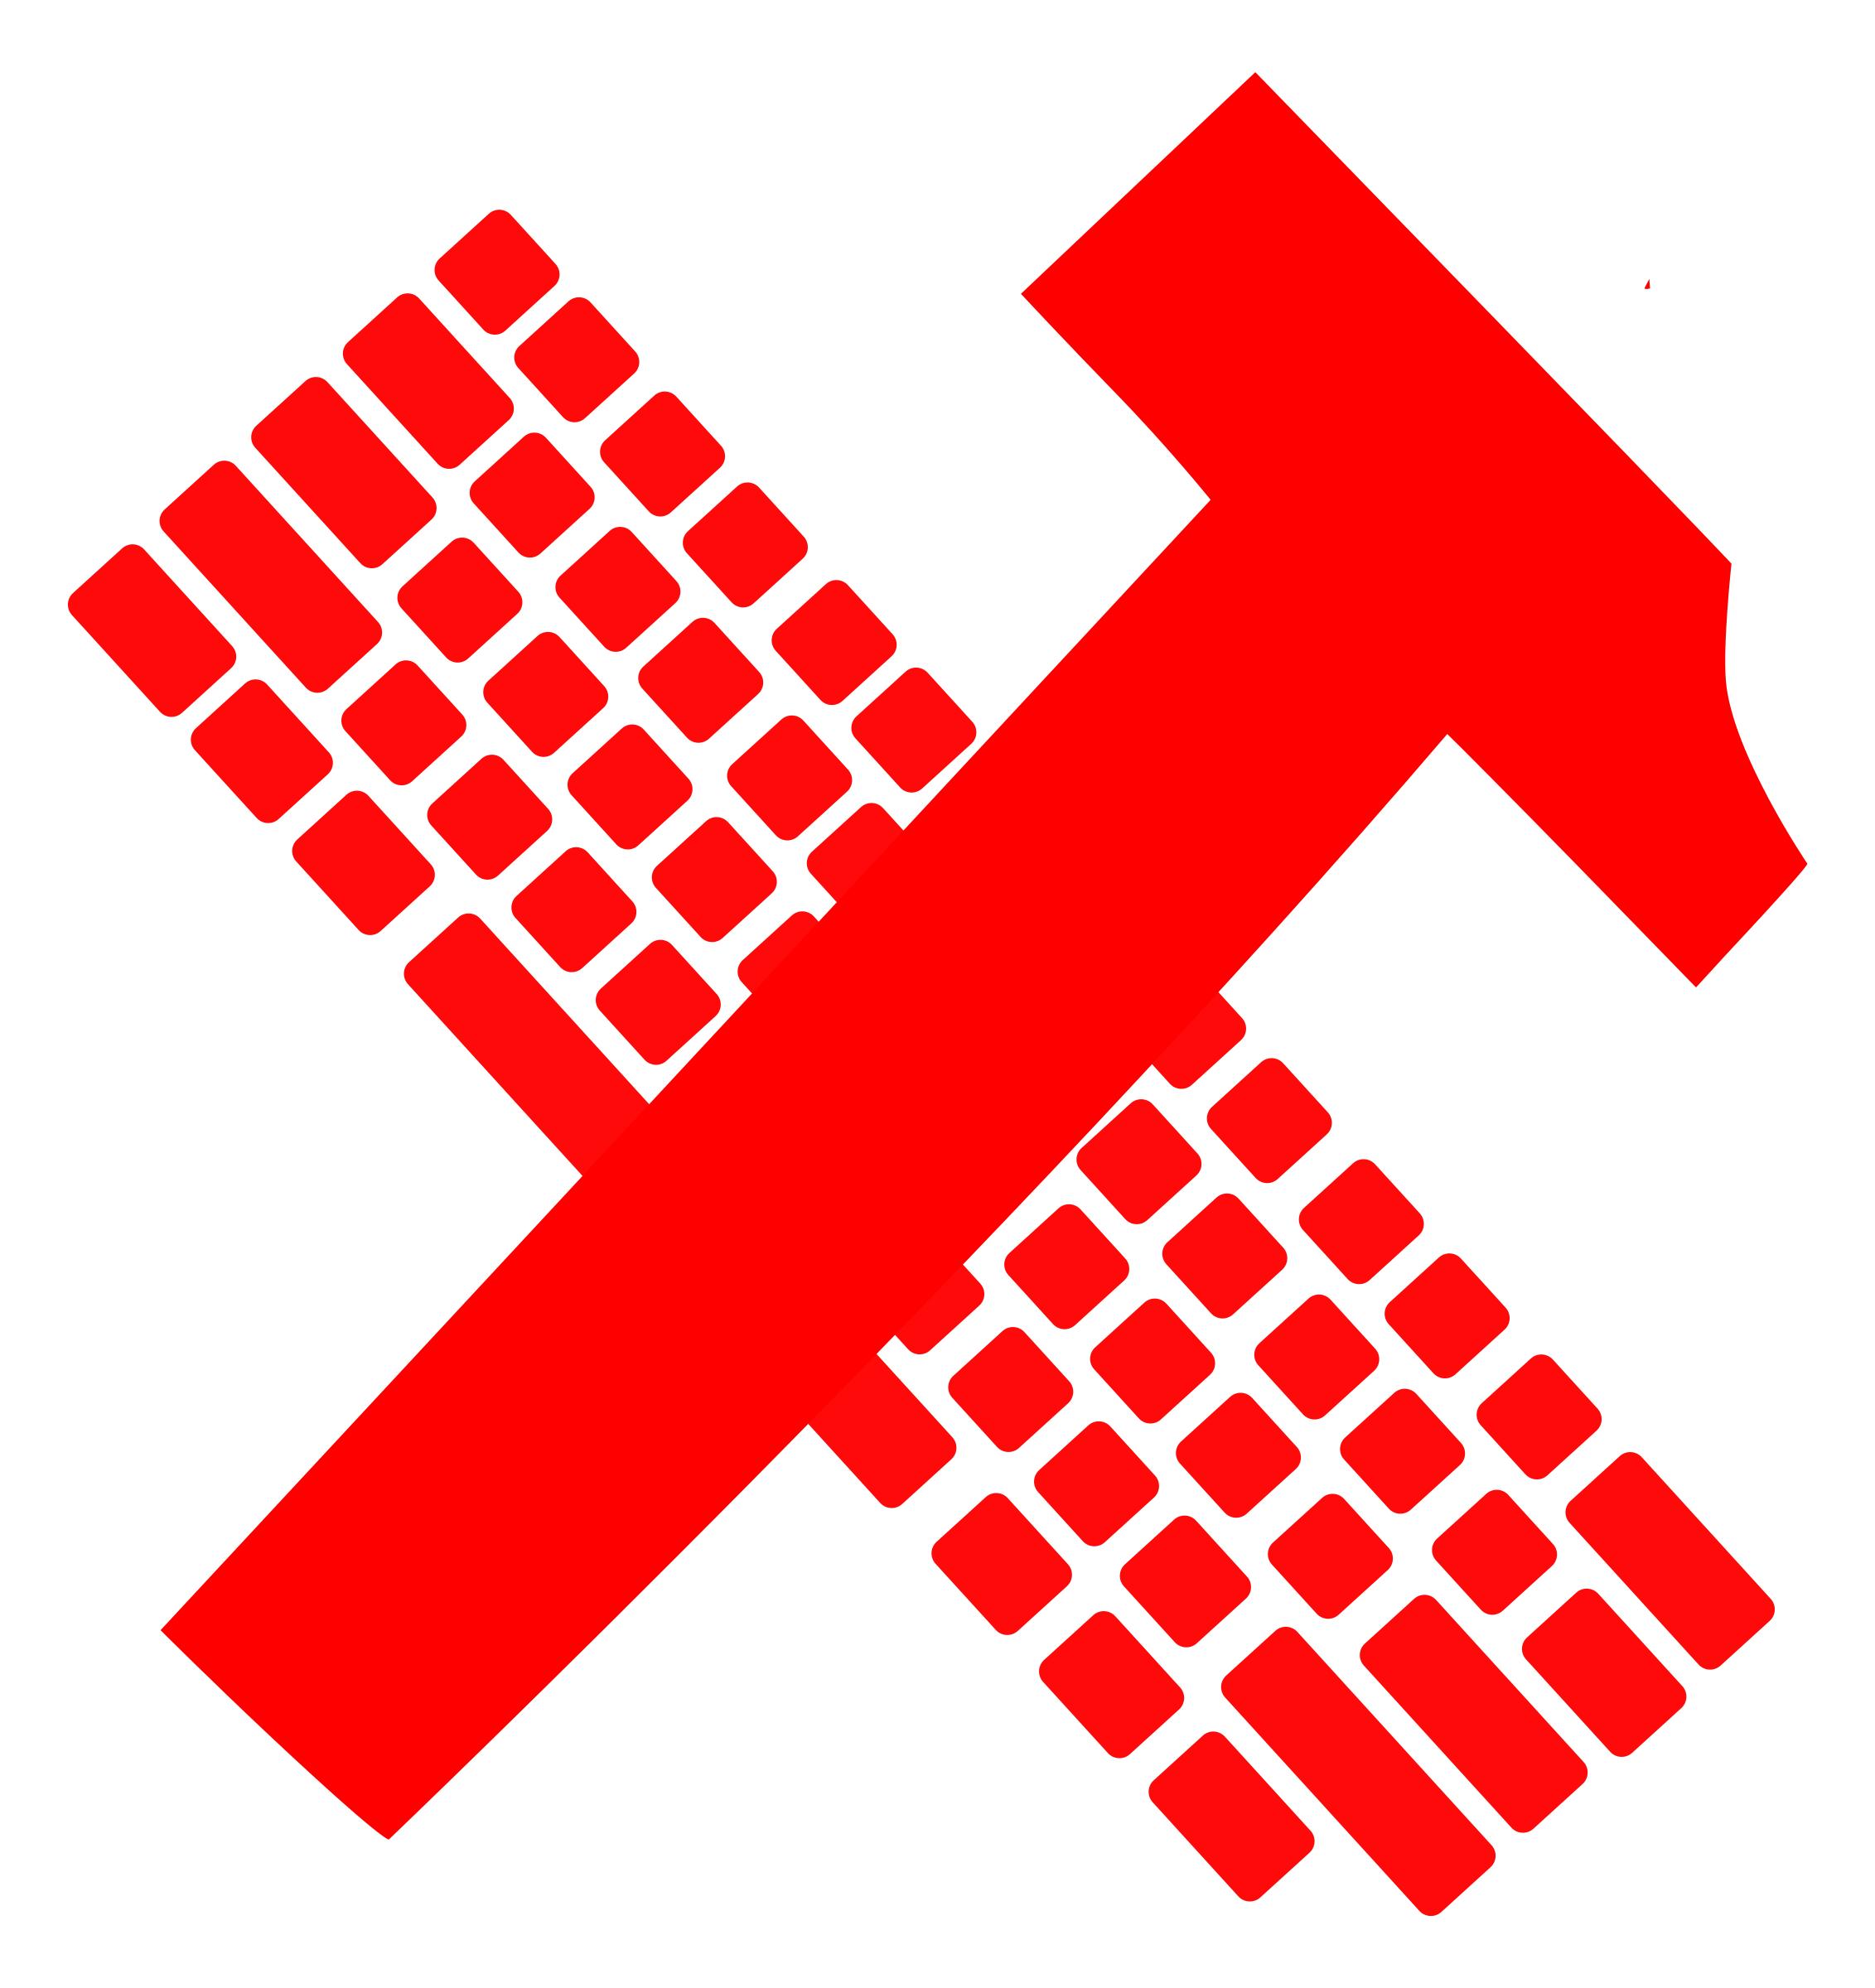 hammer and keyboard - proletariat PNG icons